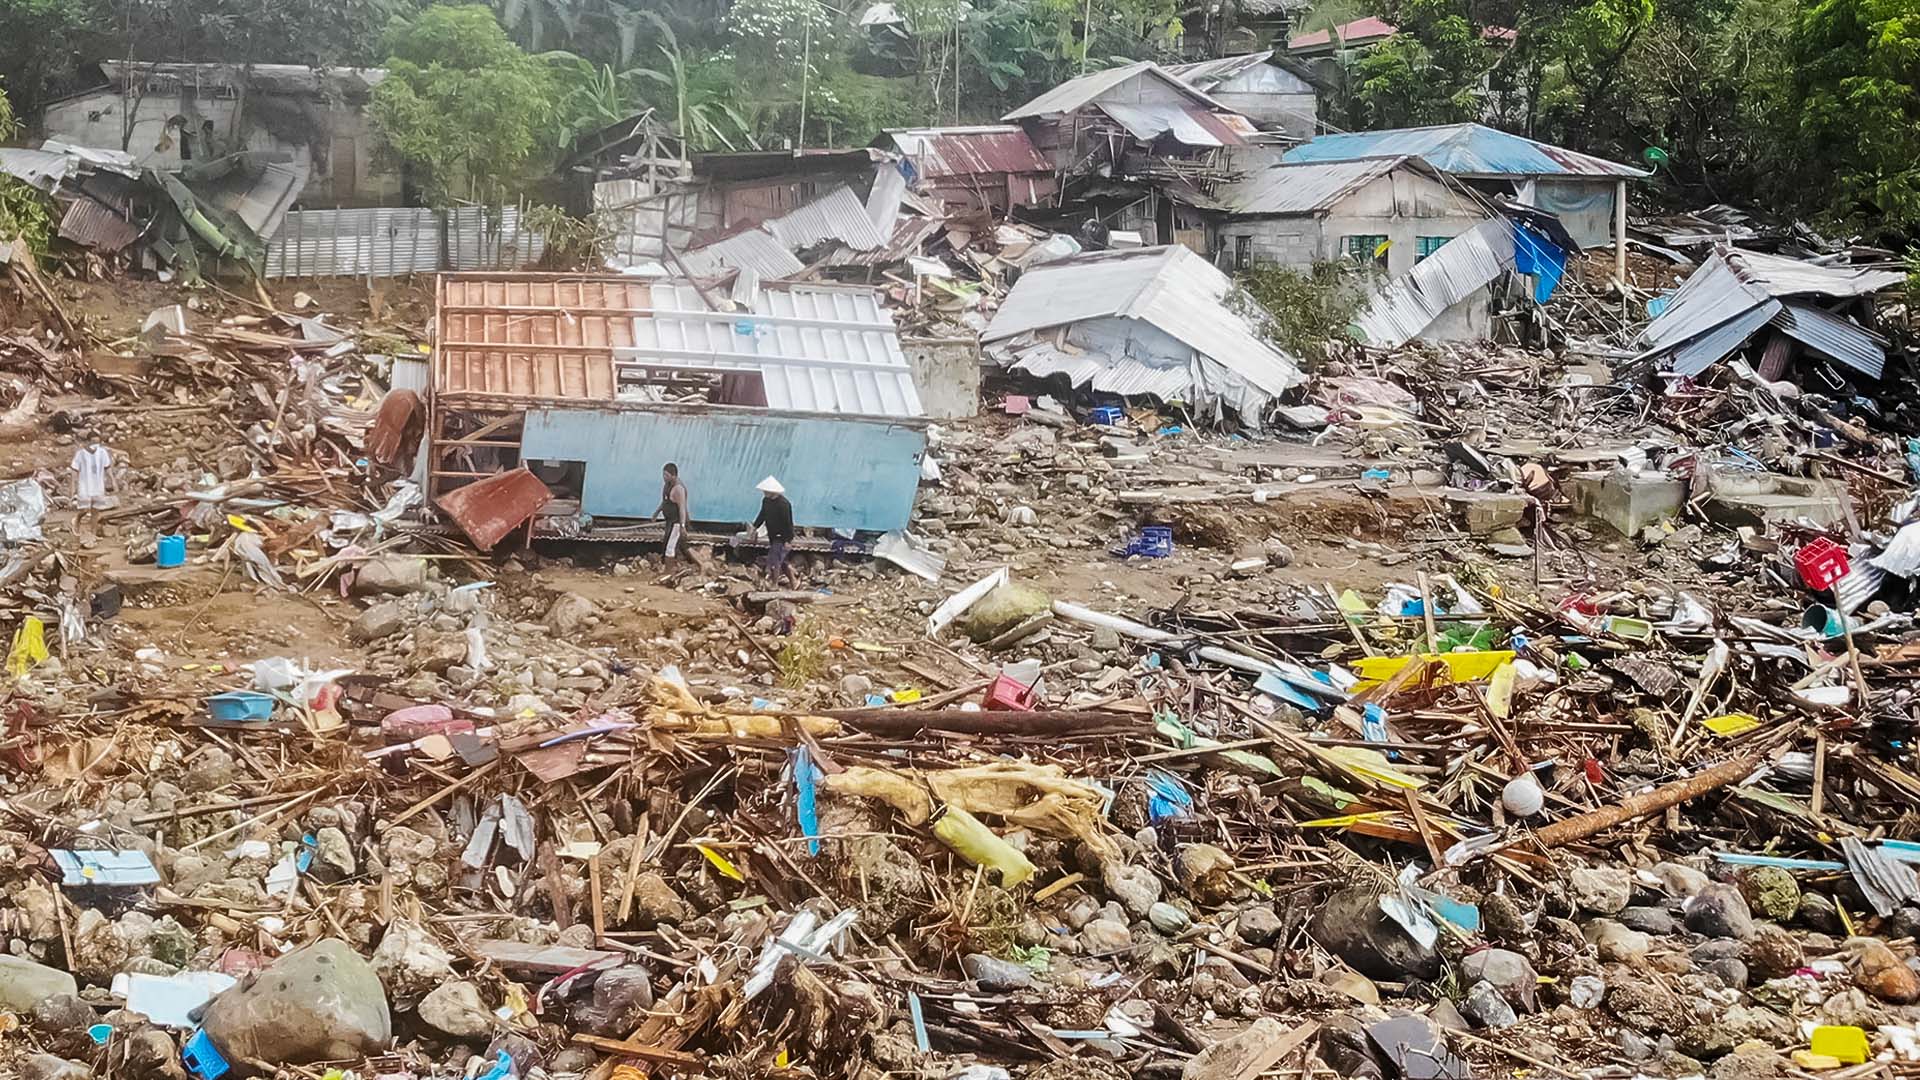 Death toll from flooding and landslides in the Philippines reaches 224